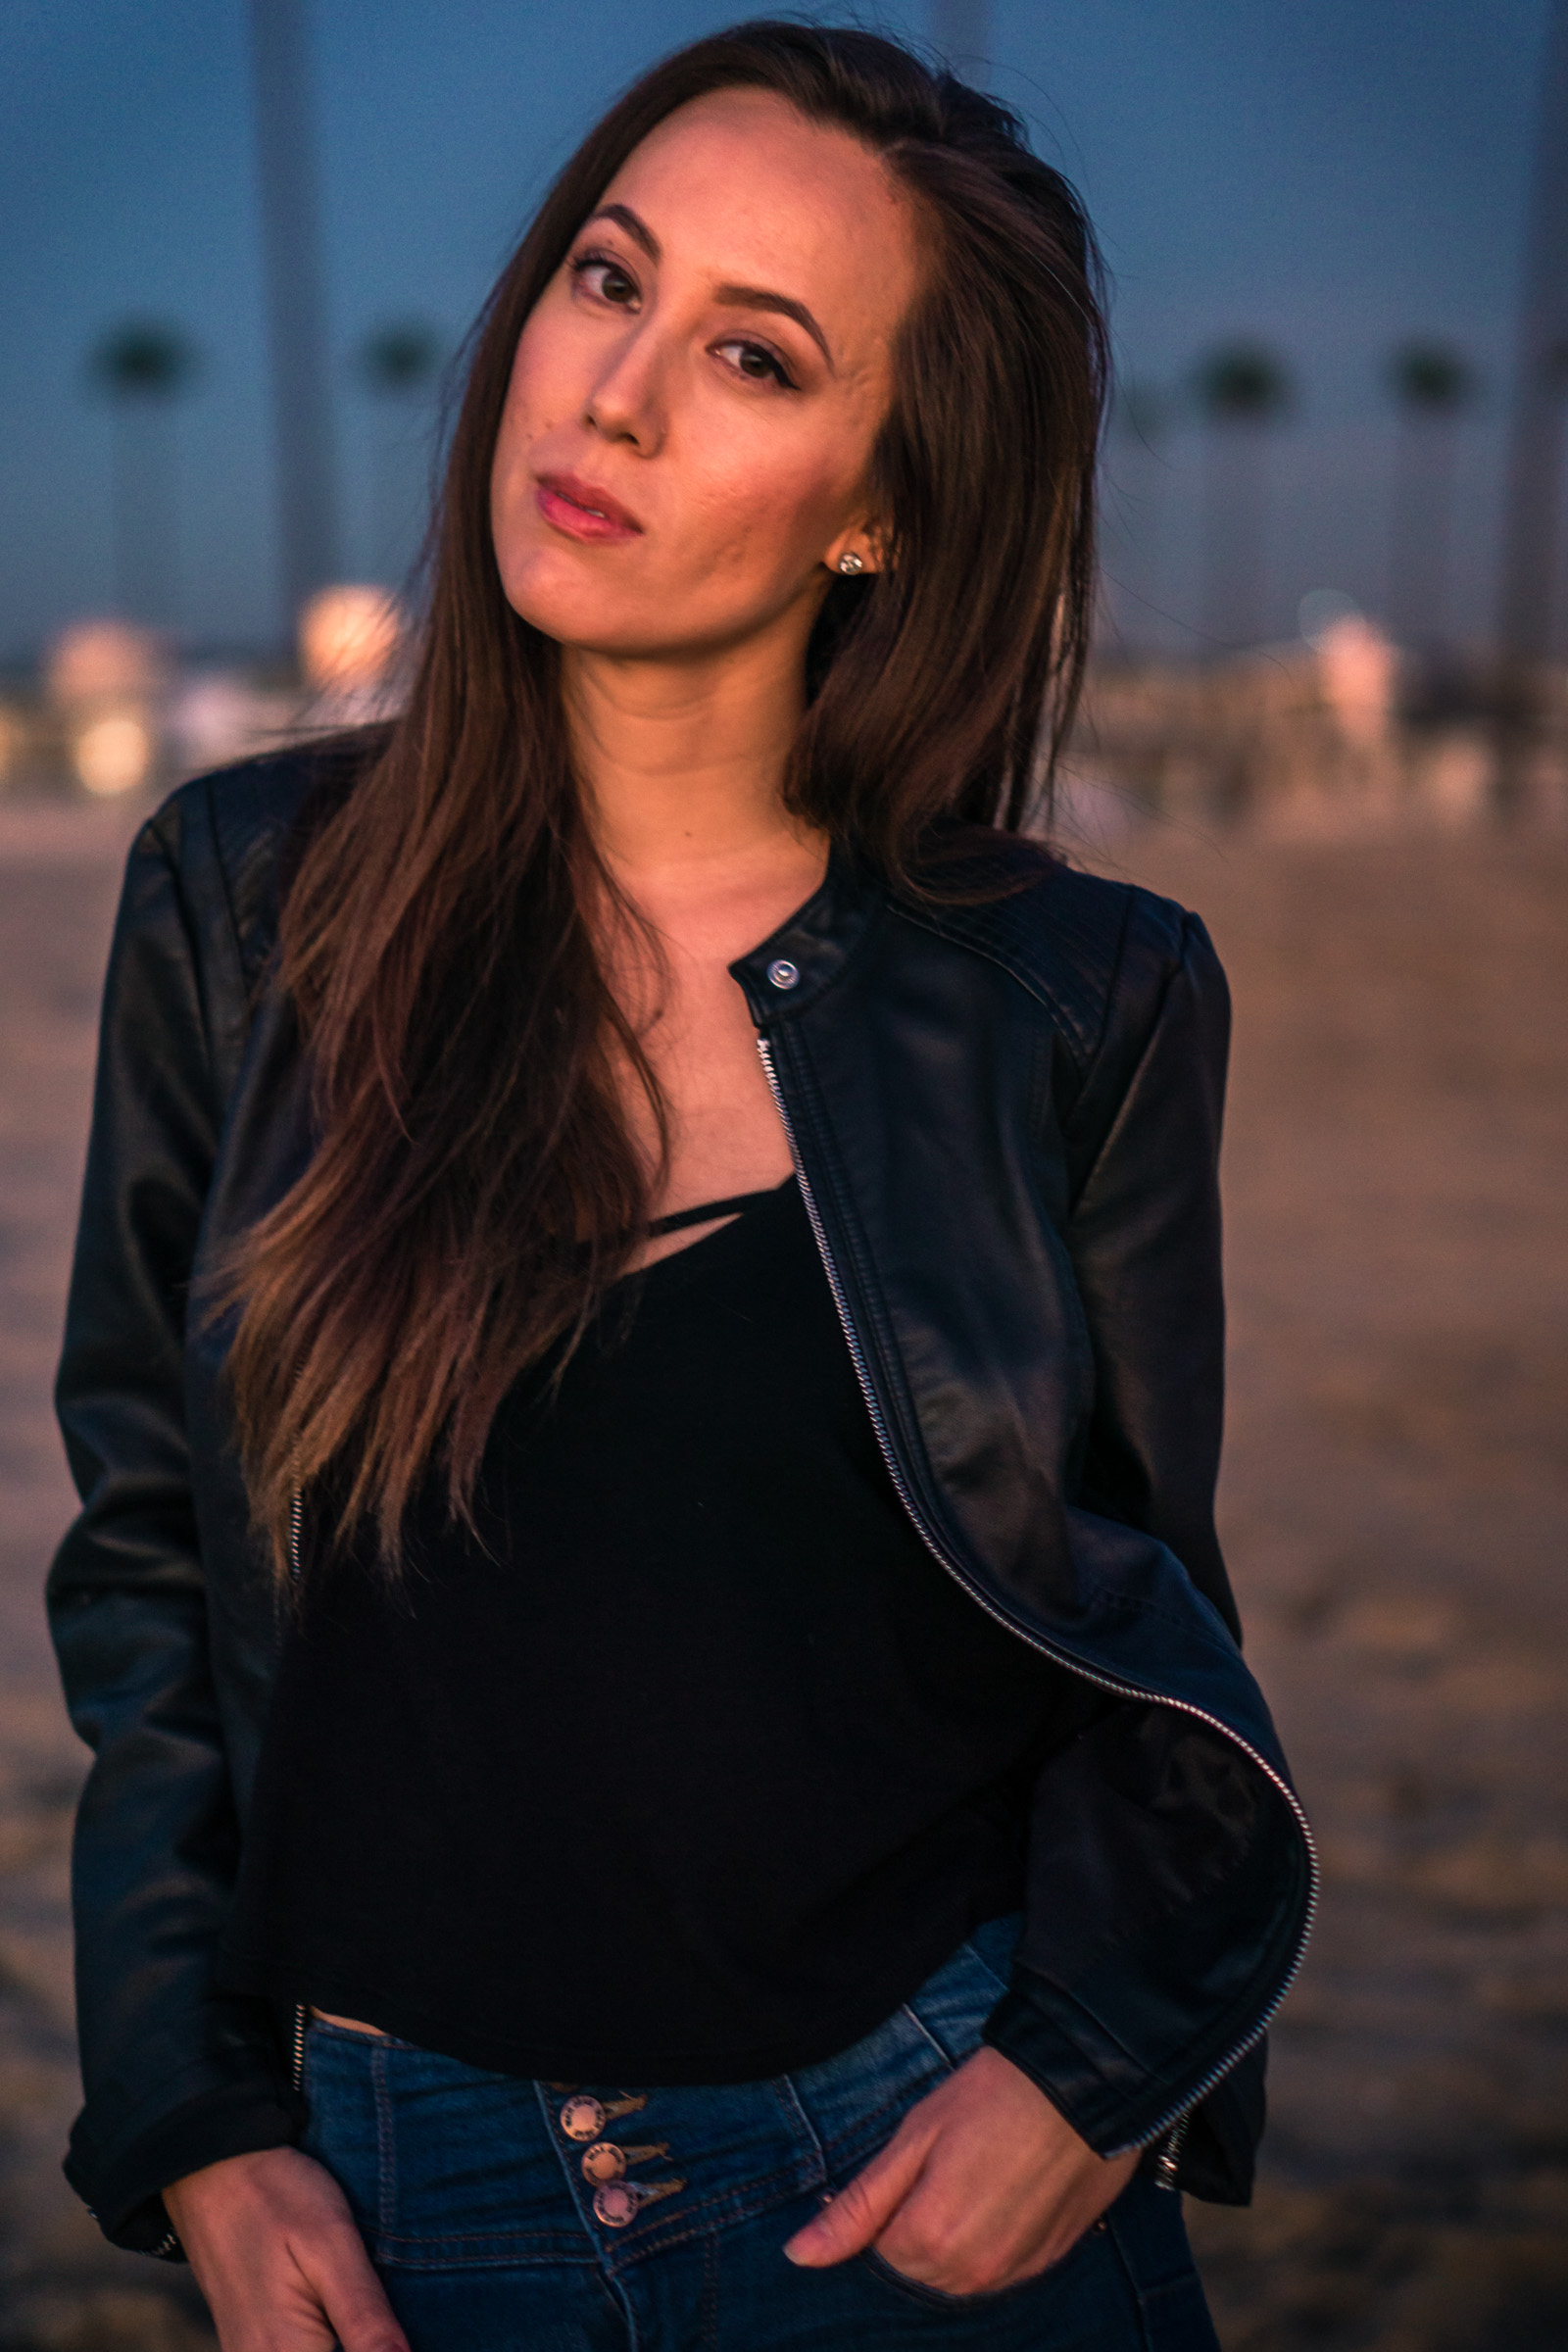 vibrant Natural light Fashion Portrait of woman posing in black leather jacket and blue jeans walking on beach during Golden hour At Balboa Pier in Newport Beach